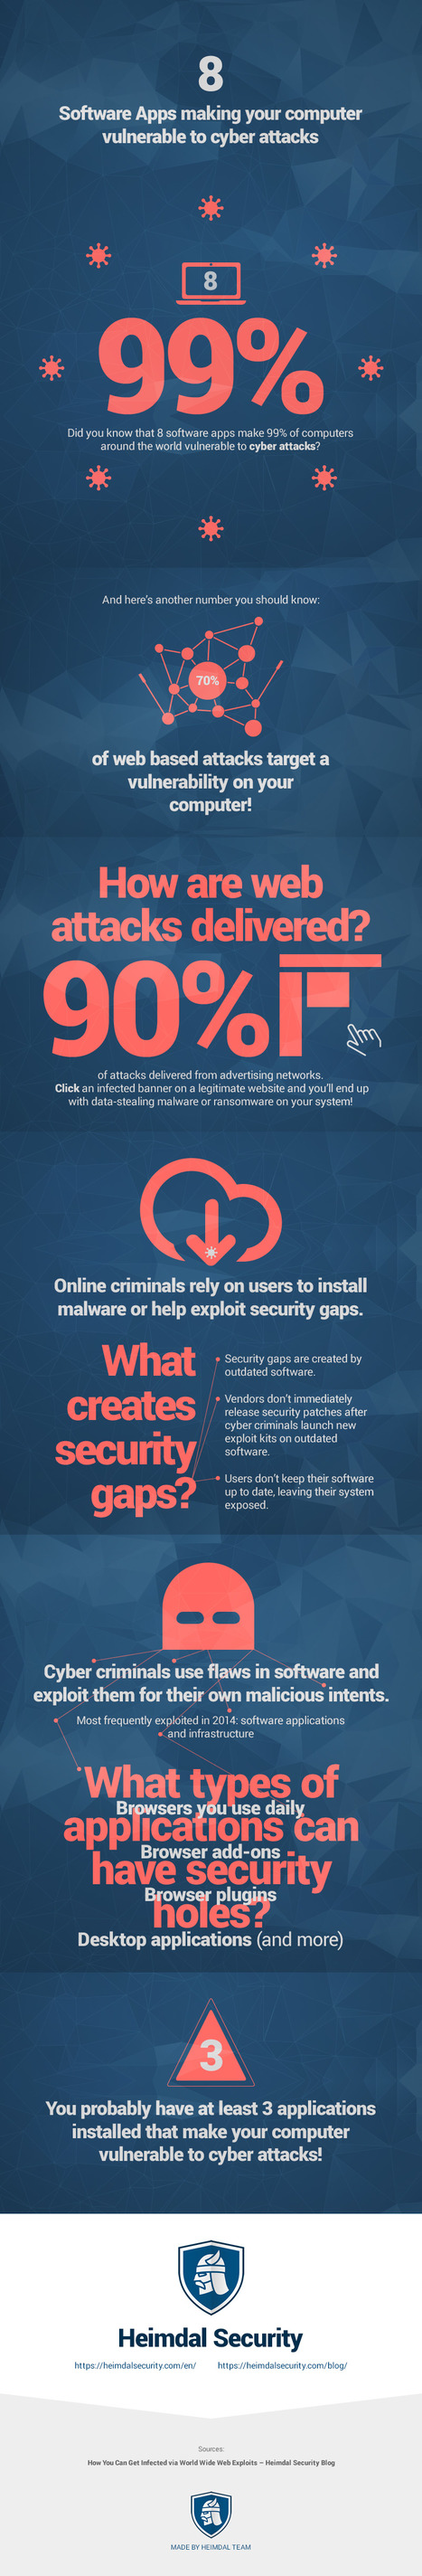 8 Vulnerable Software Apps Exposing Your Computer to Cyber Attacks [Infographic] | CyberSecurity | eSkills | Latest Social Media News | Scoop.it